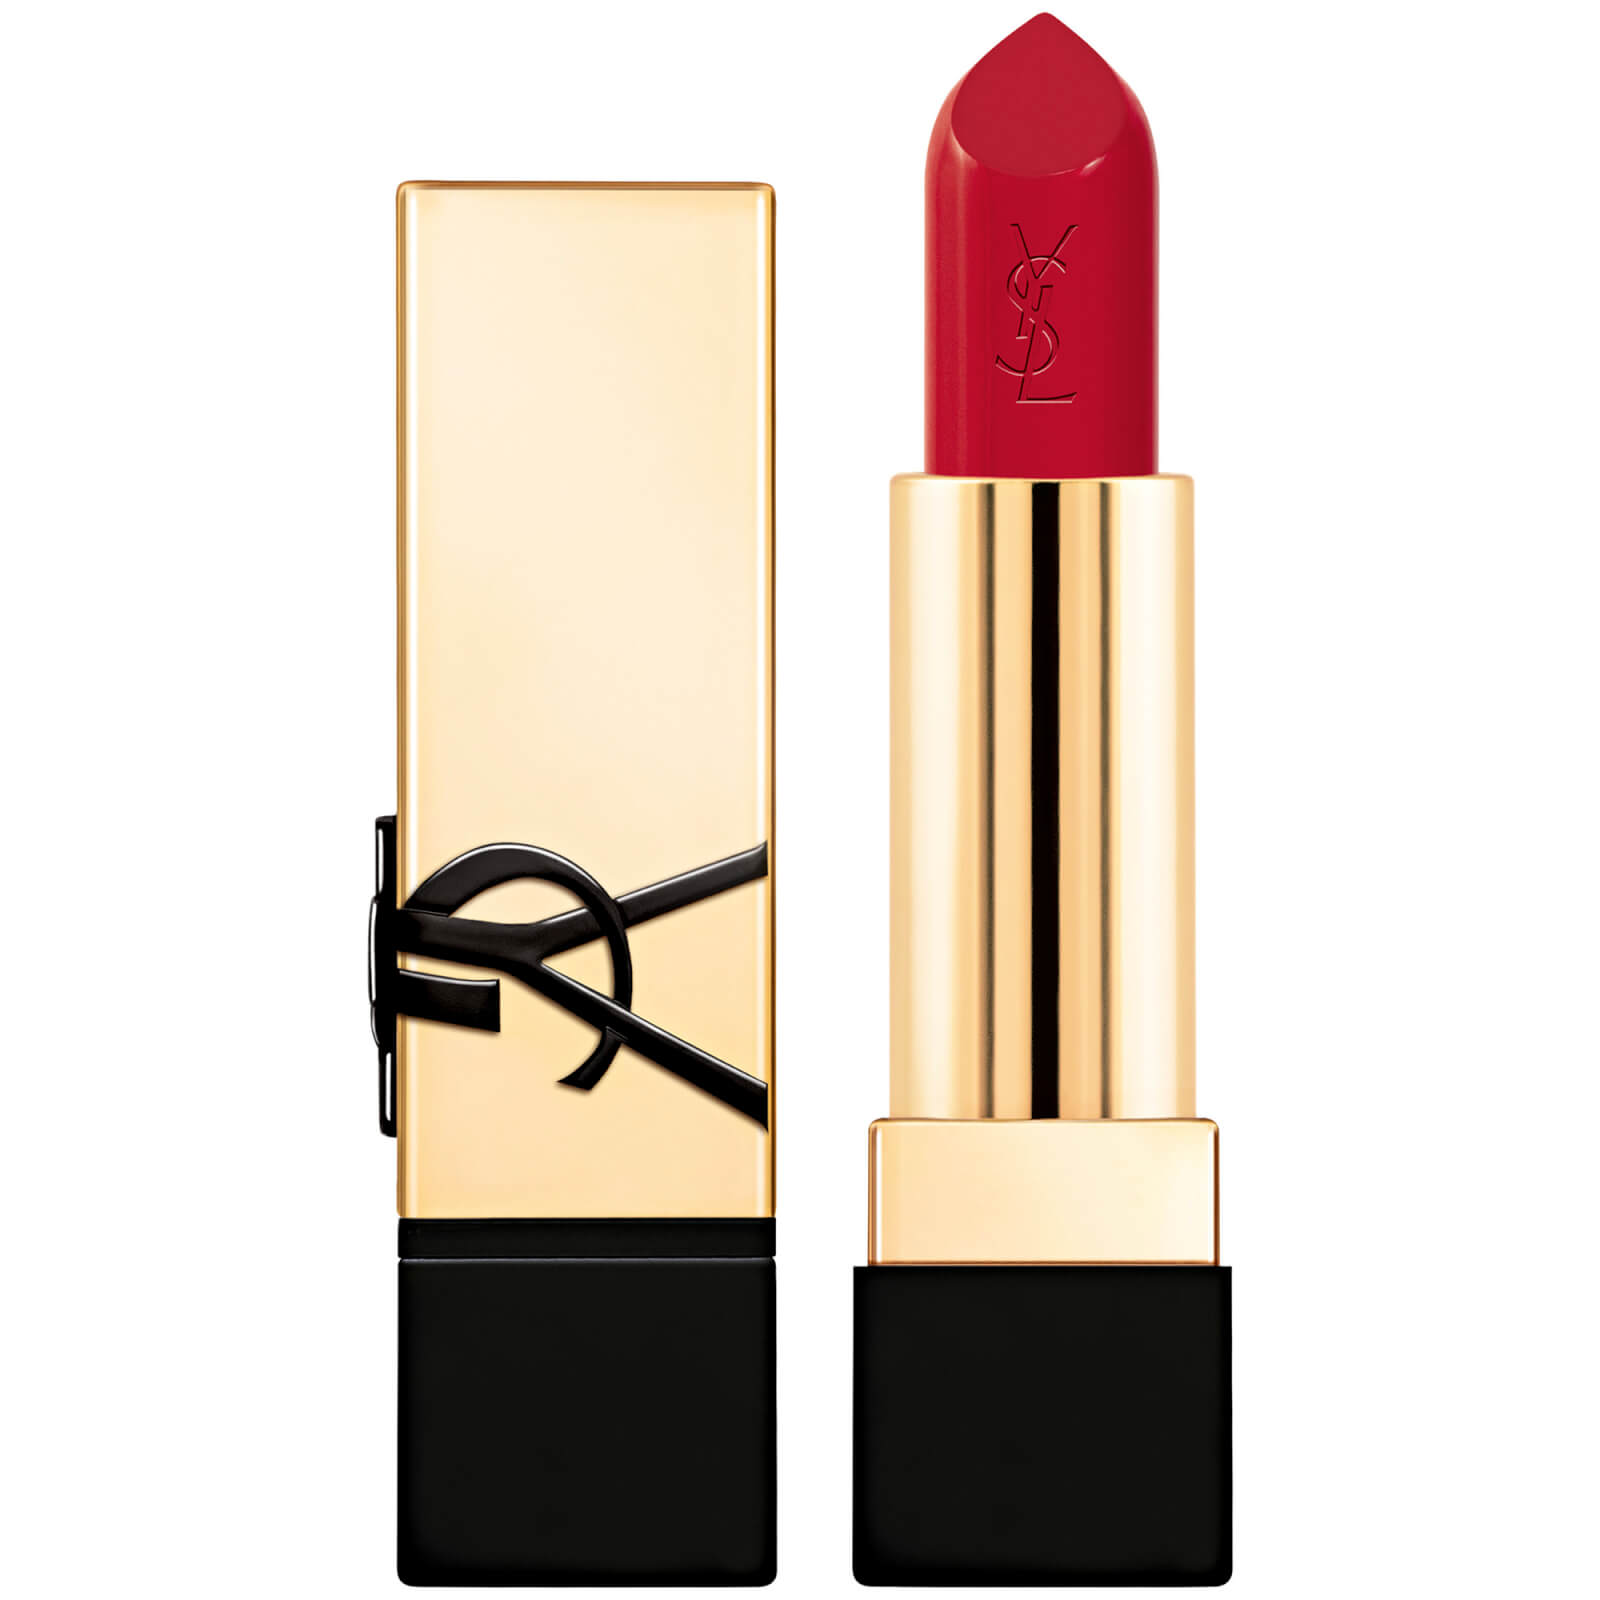 Ysl Yves Saint Laurent Rouge Pur Couture Renovation Lipstick 3g (various Shades) - Rm